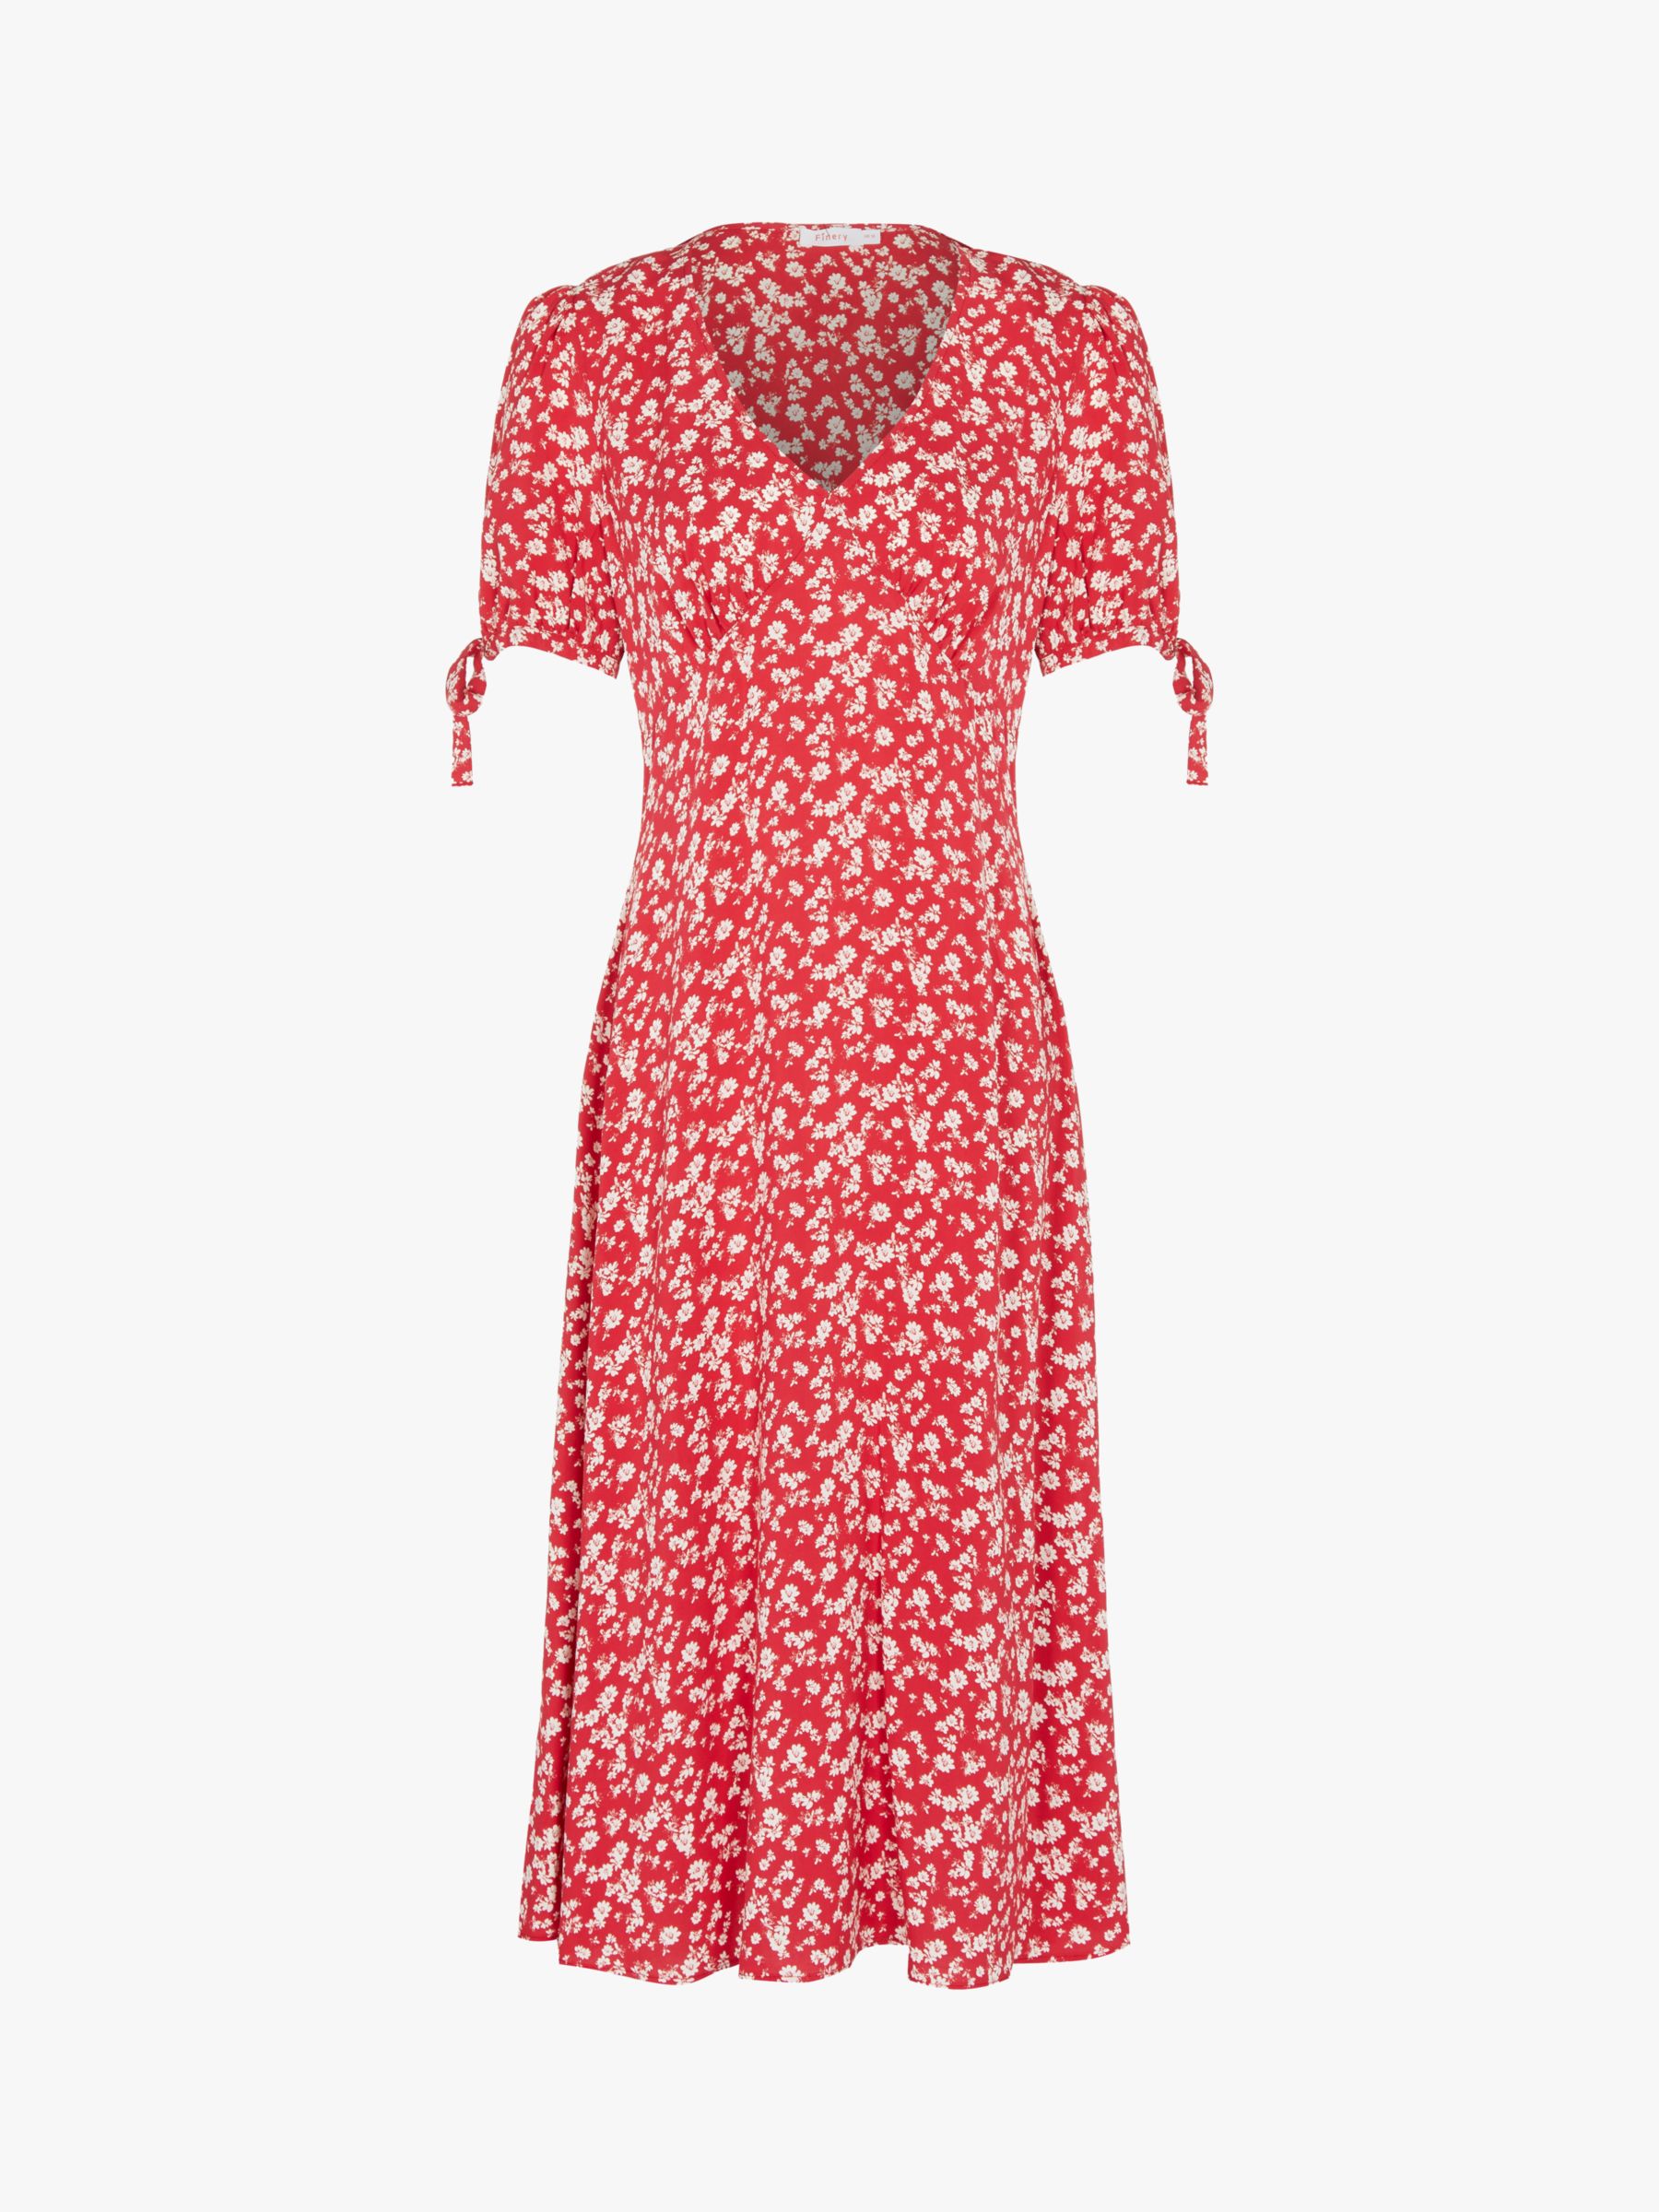 Finery Claire Ditsy Floral Print Dress, Red/Ivory